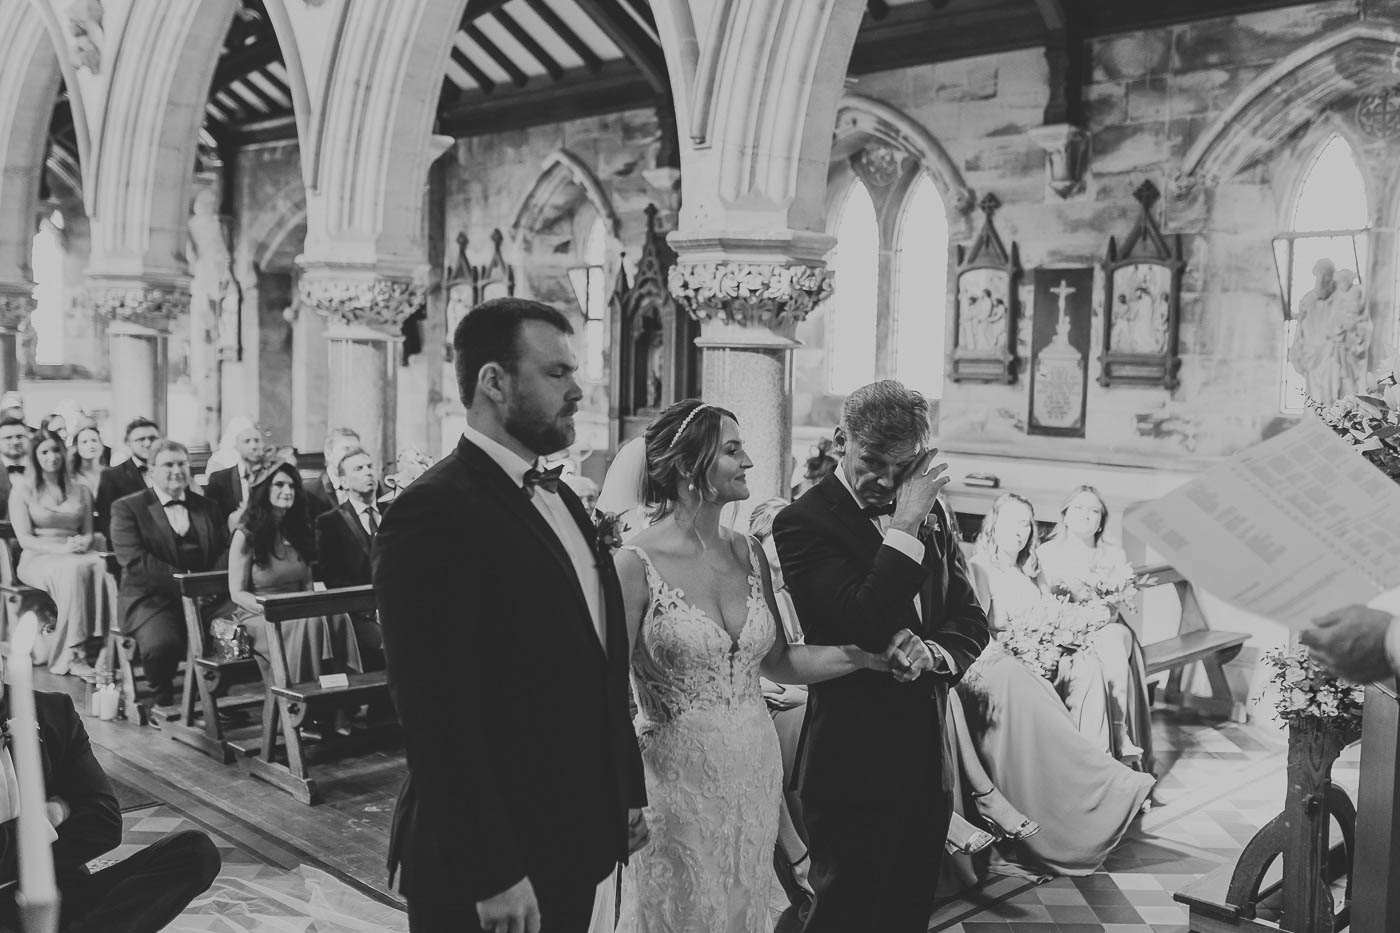 rudding park wedding | photo of father of the bride wiping away tears during wedding ceremony at rudding park chapel | harrogate wedding photographer